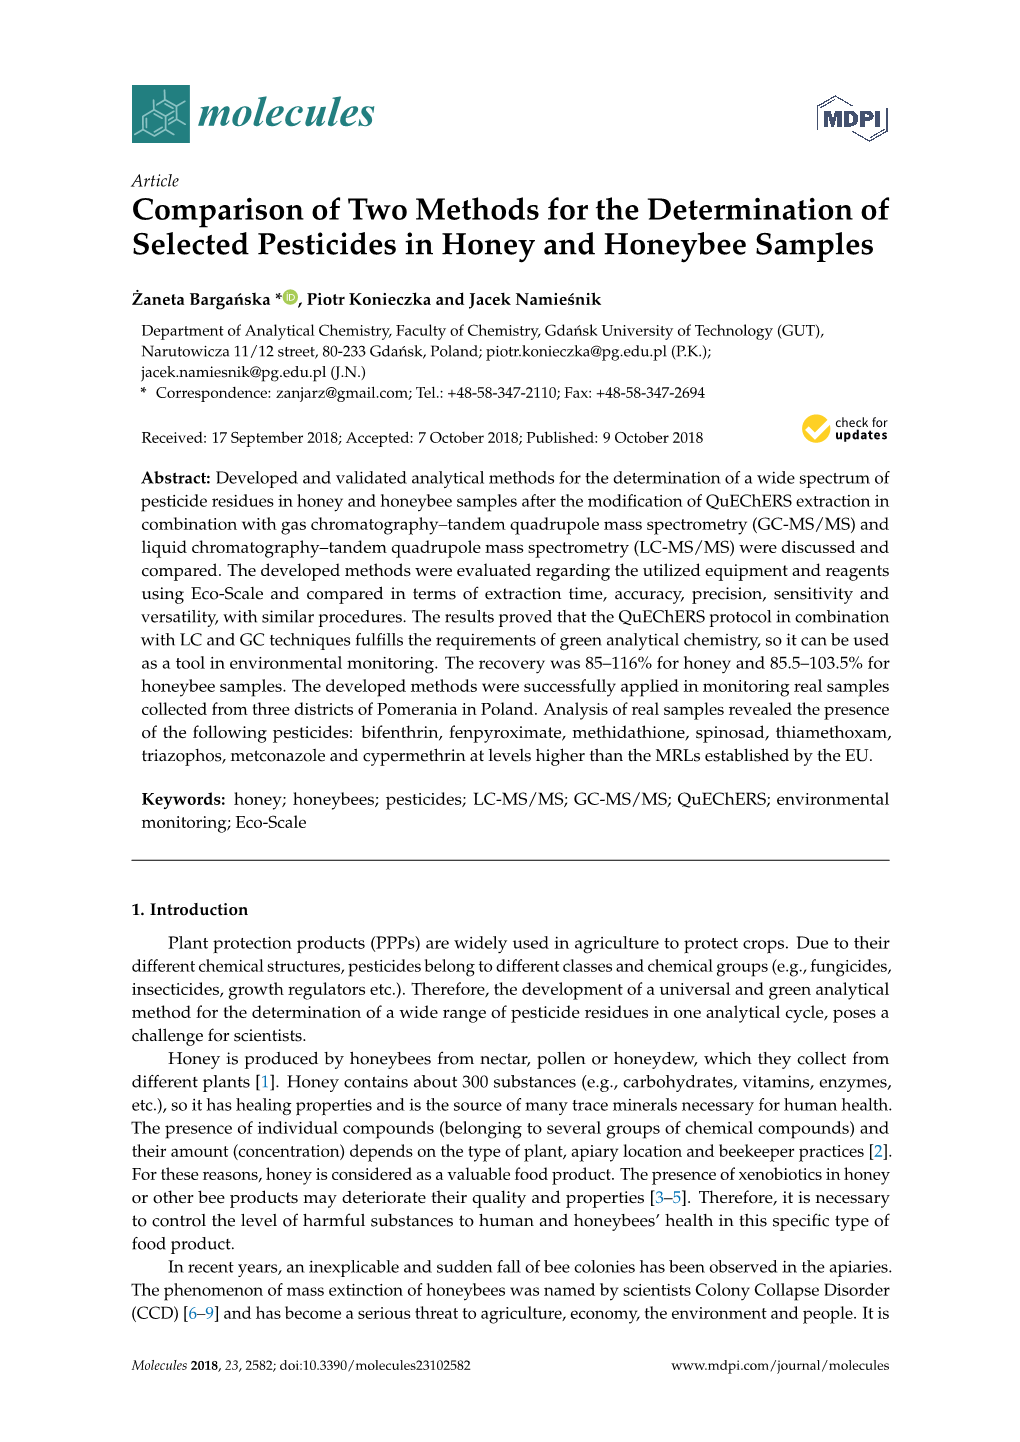 Comparison of Two Methods for the Determination of Selected Pesticides in Honey and Honeybee Samples